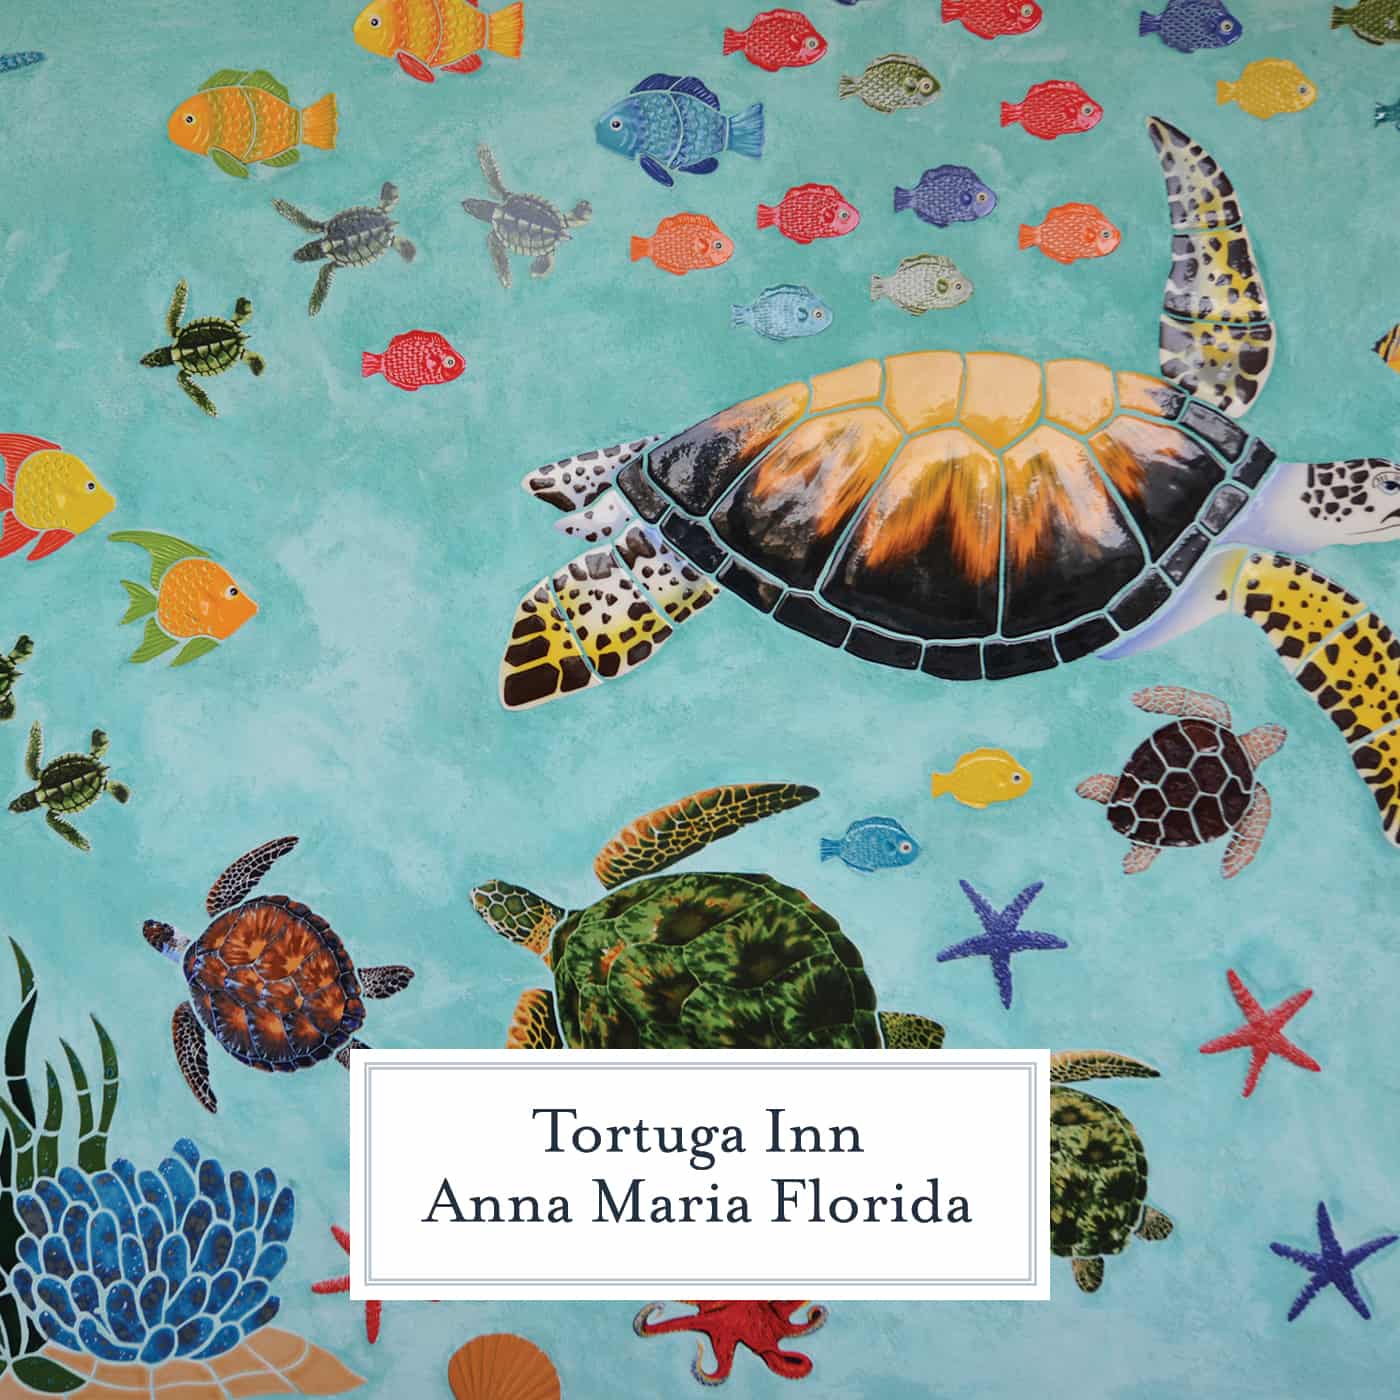 The Tortuga Inn is the best place to stay on Anna Maria Island, ideal for families and solo travelers, it has all the luxuries of home. #annamariaisland #visitflorida www.savoryexperiments.com